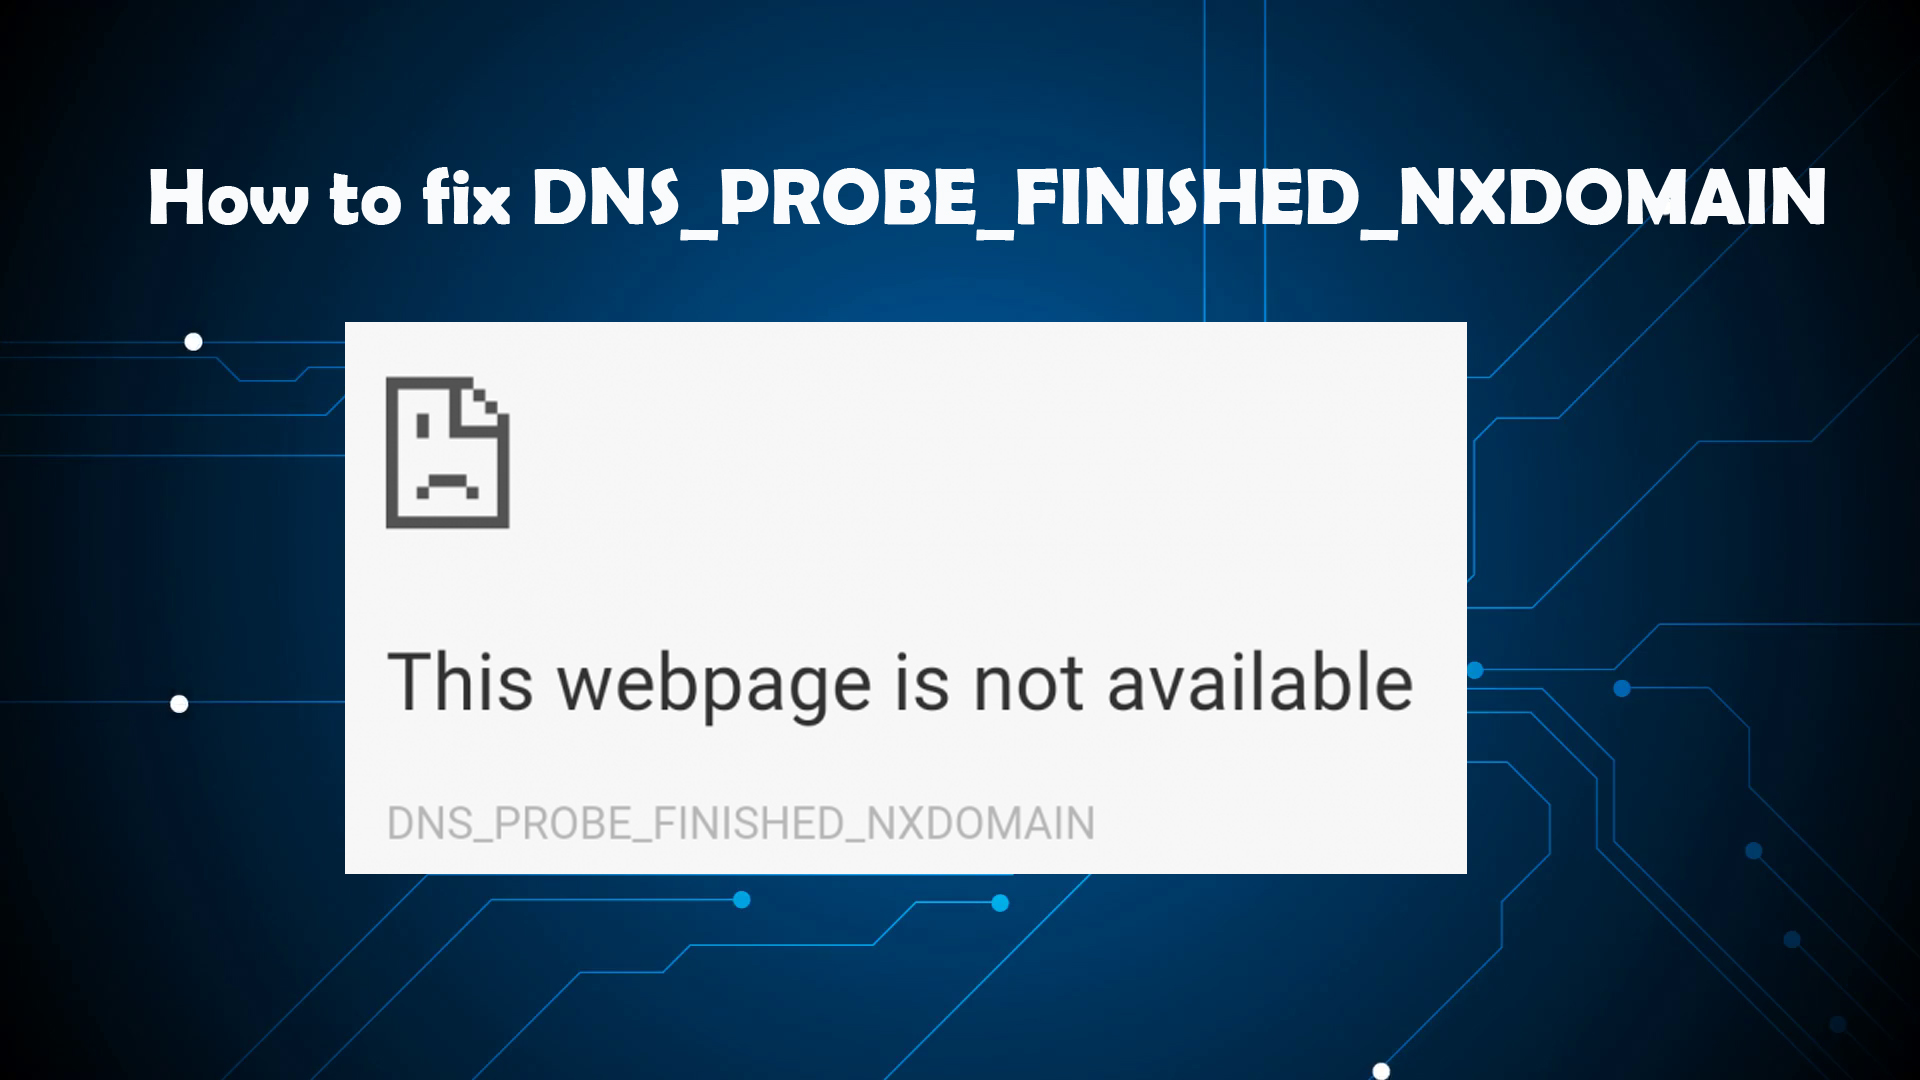 how to solve dns_probe_finished_nxdomain problem